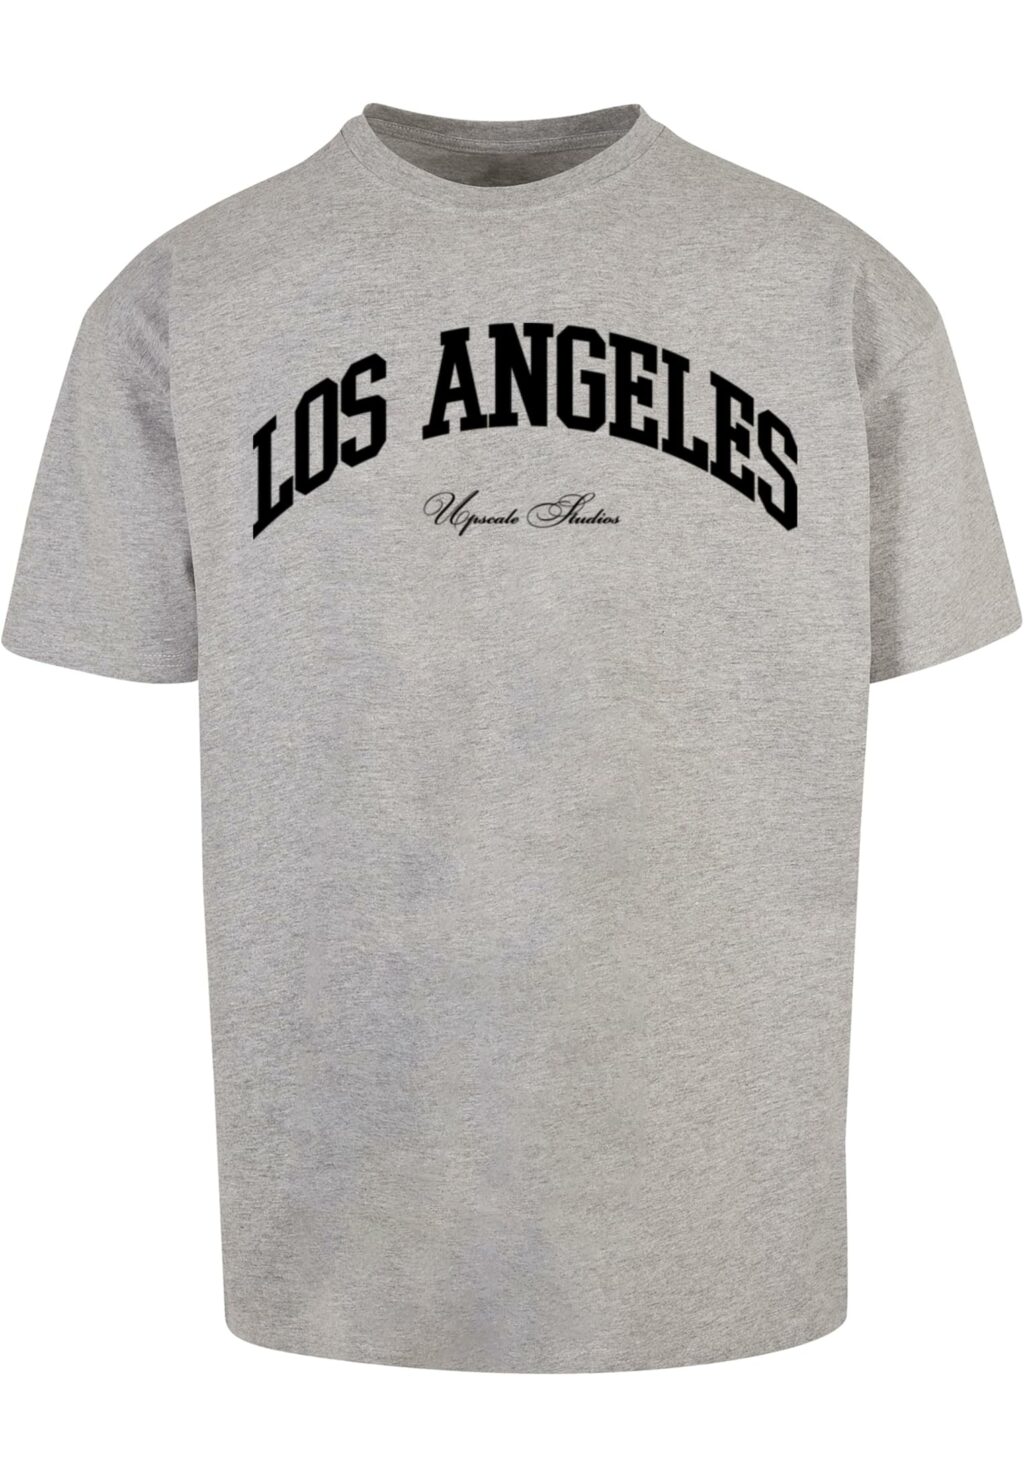 L.A. College Oversize Tee grey MT2462